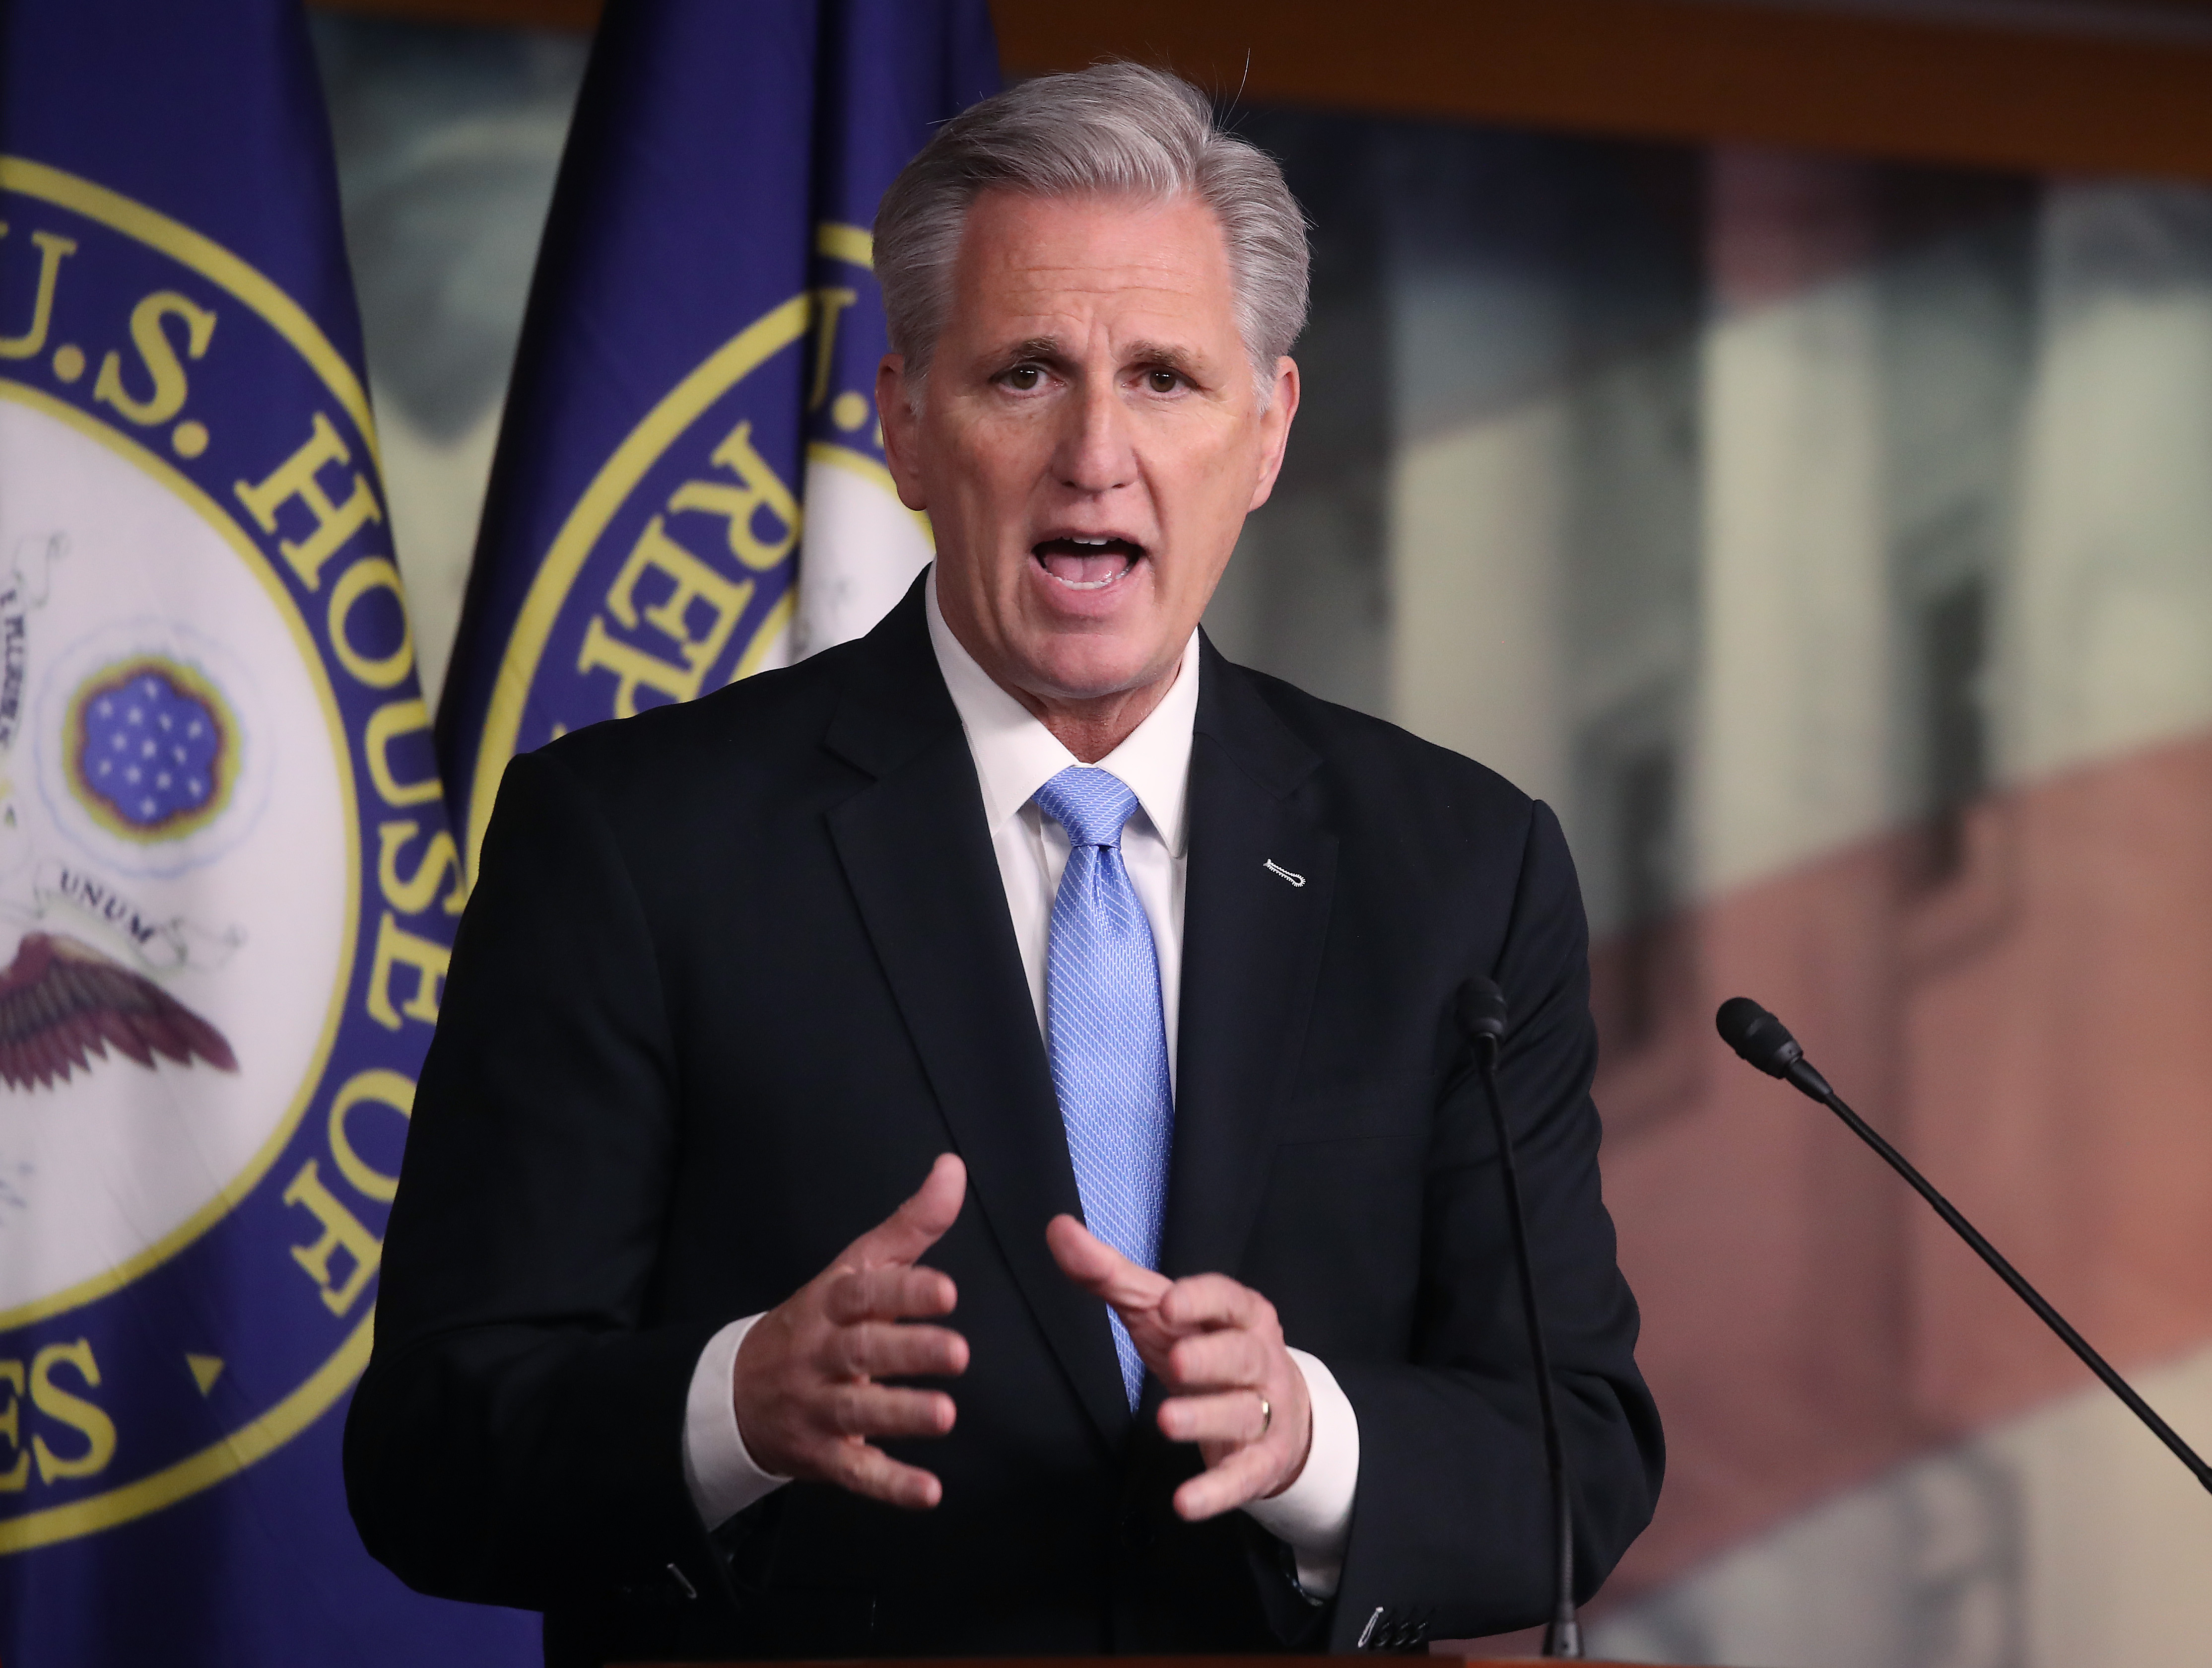 House Minority Leader Kevin McCarthy (R-CA) speaks during his weekly news conference at the U.S. Capitol on February 27, 2020 in Washington, DC.